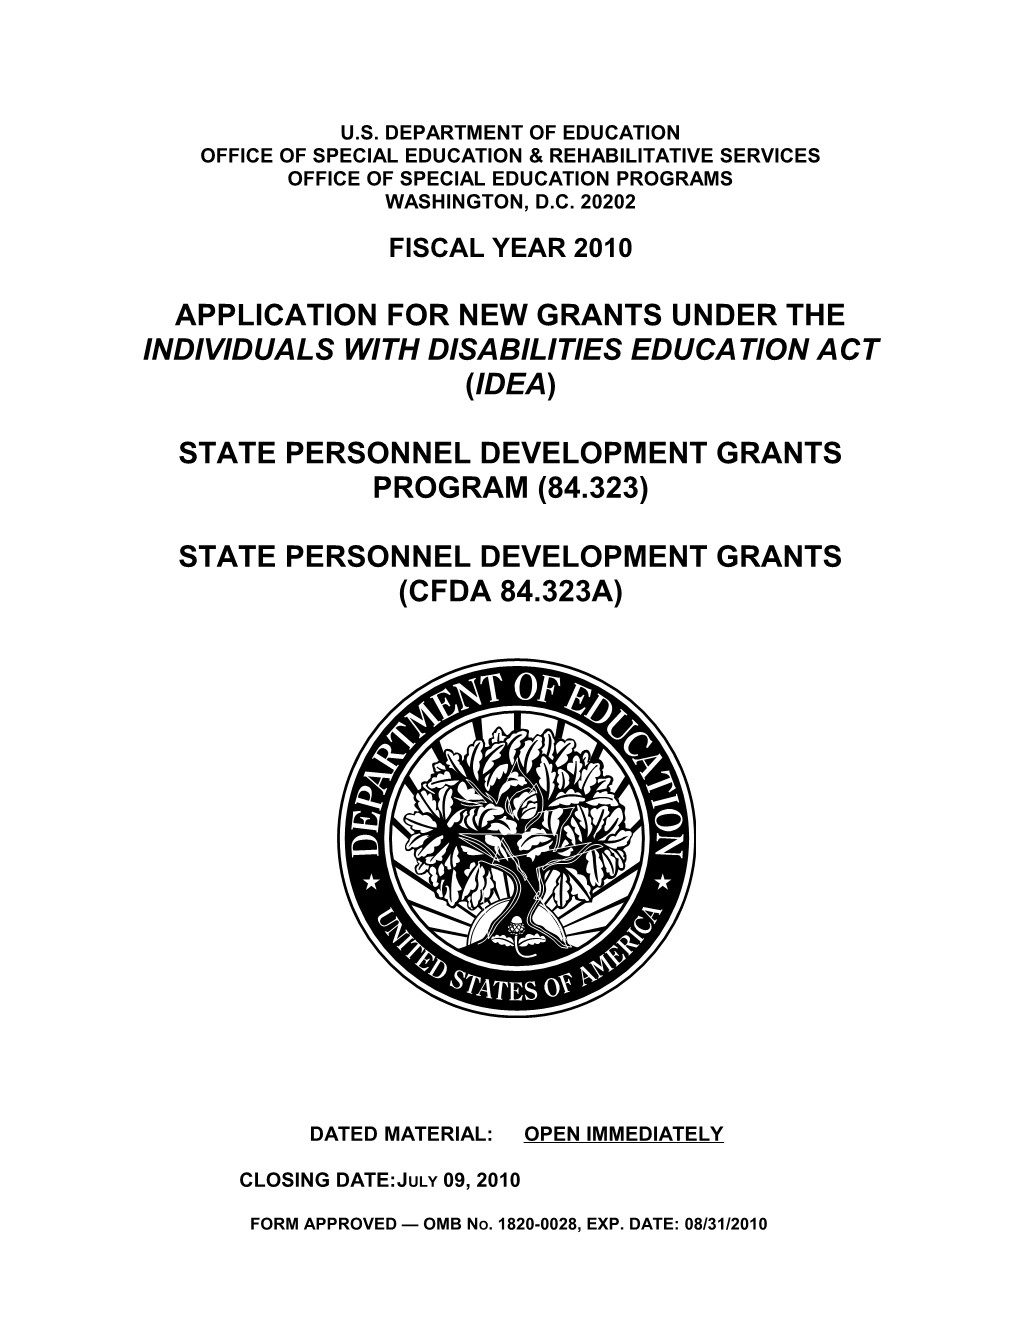 FY10 Application for New Grants Under the Individuals with Disabilities Education Act (IDEA)